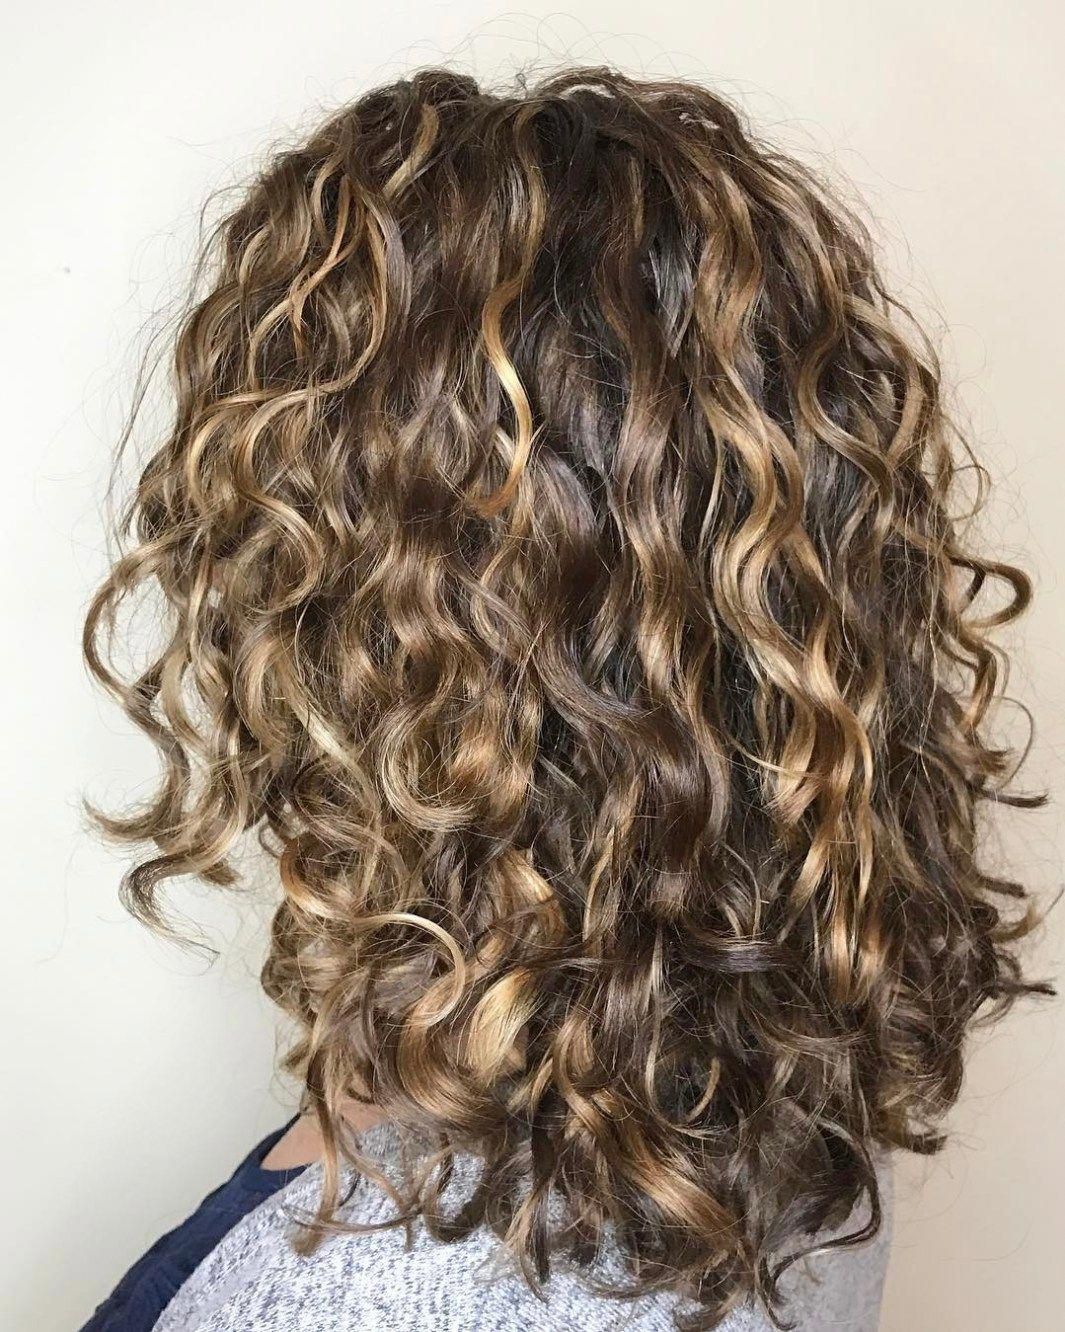 Black Curly Hair With Blonde Highlights